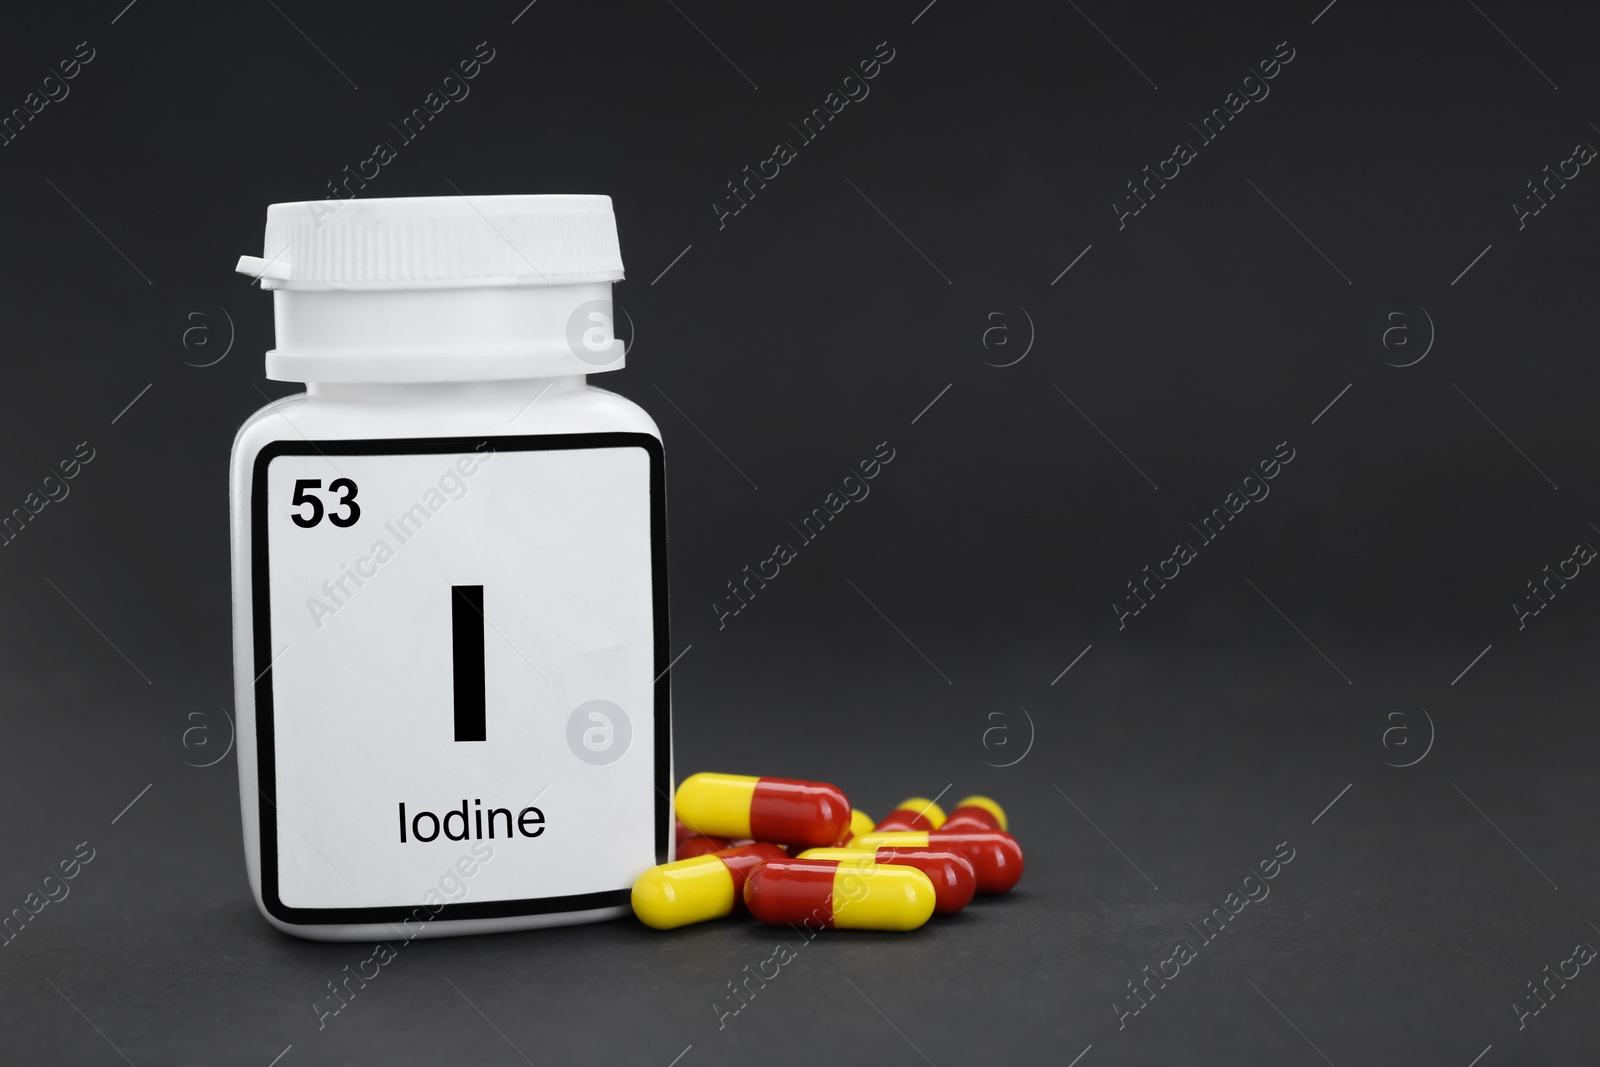 Photo of Plastic jar and iodine pills on black background. Space for text